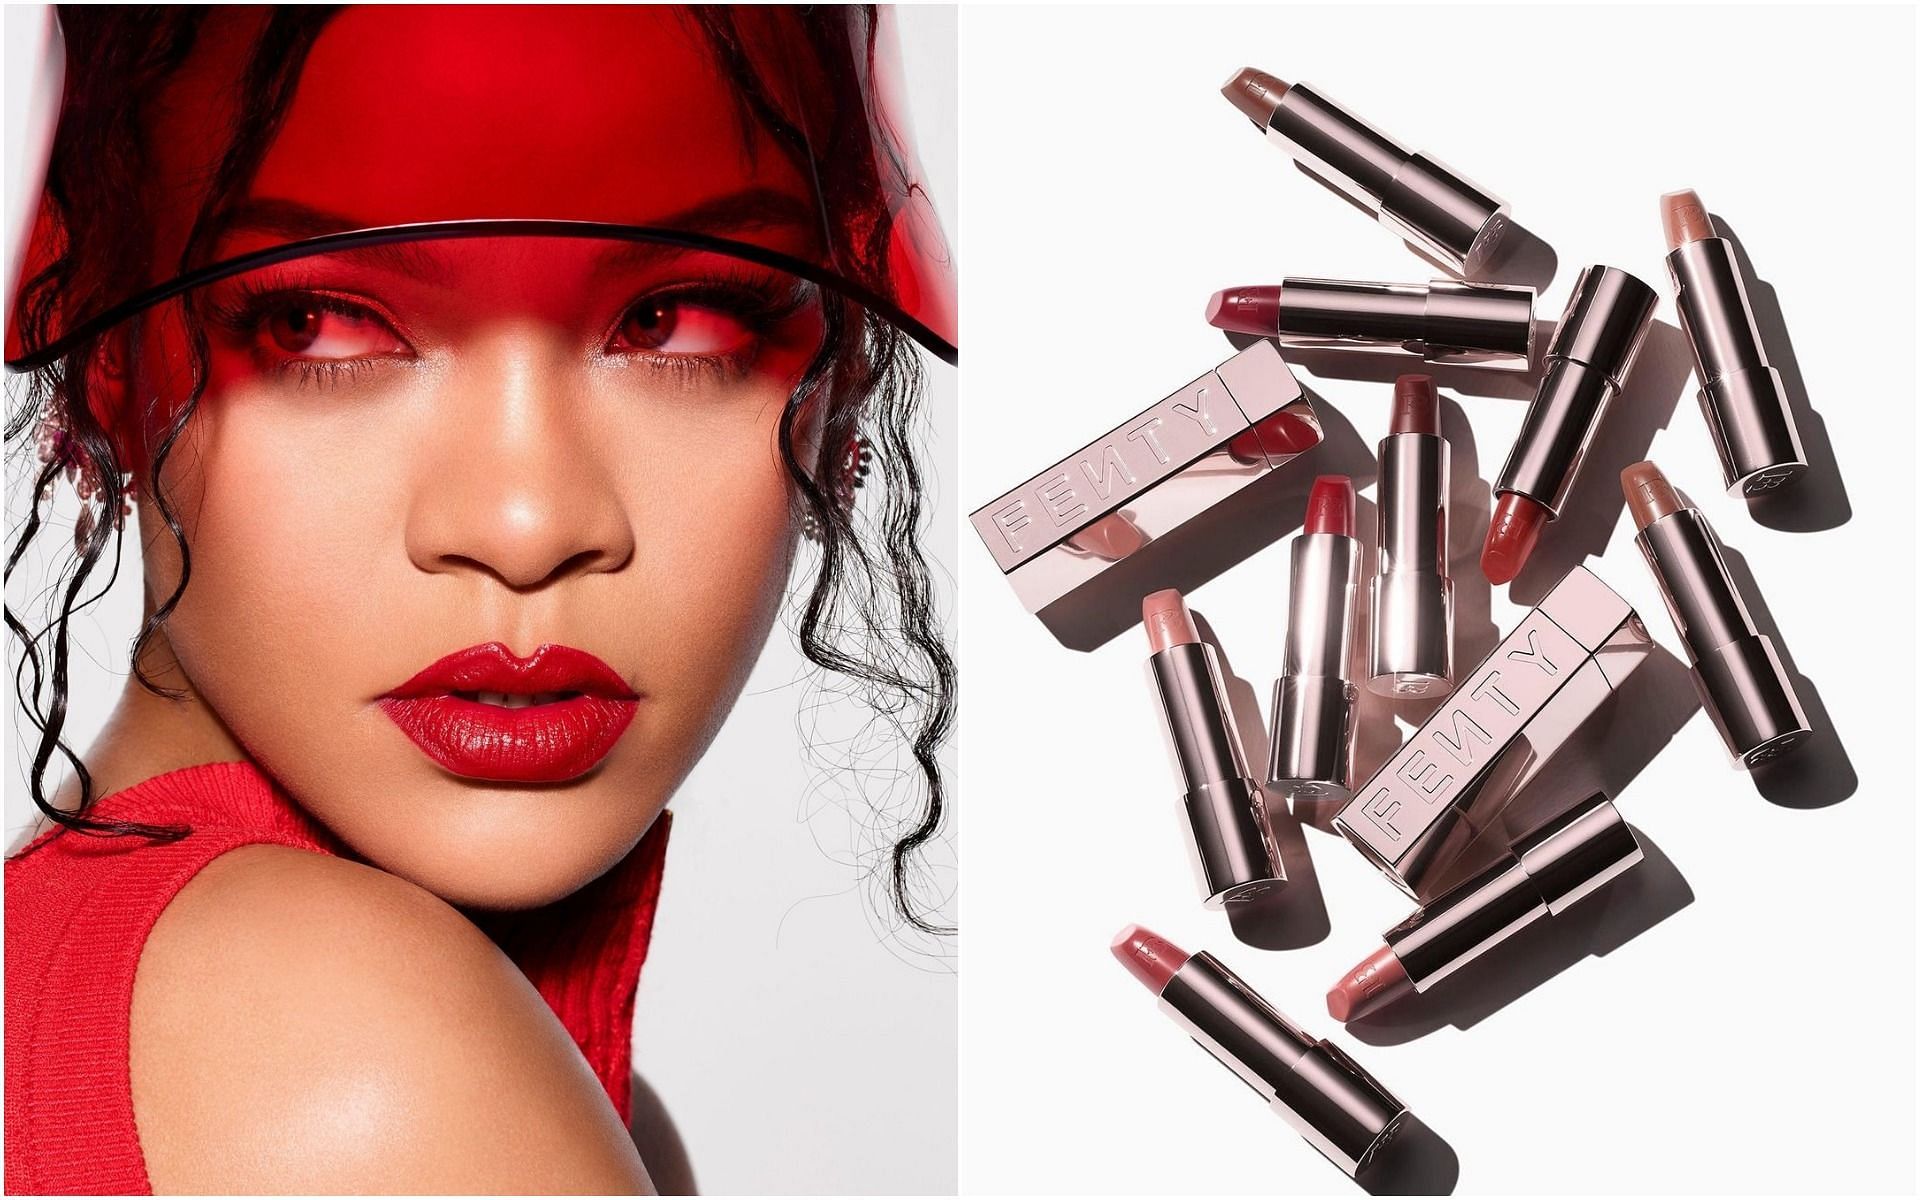 Rihanna’s Fenty Beauty Empire expands with launch of new Icon Lipstick Collection